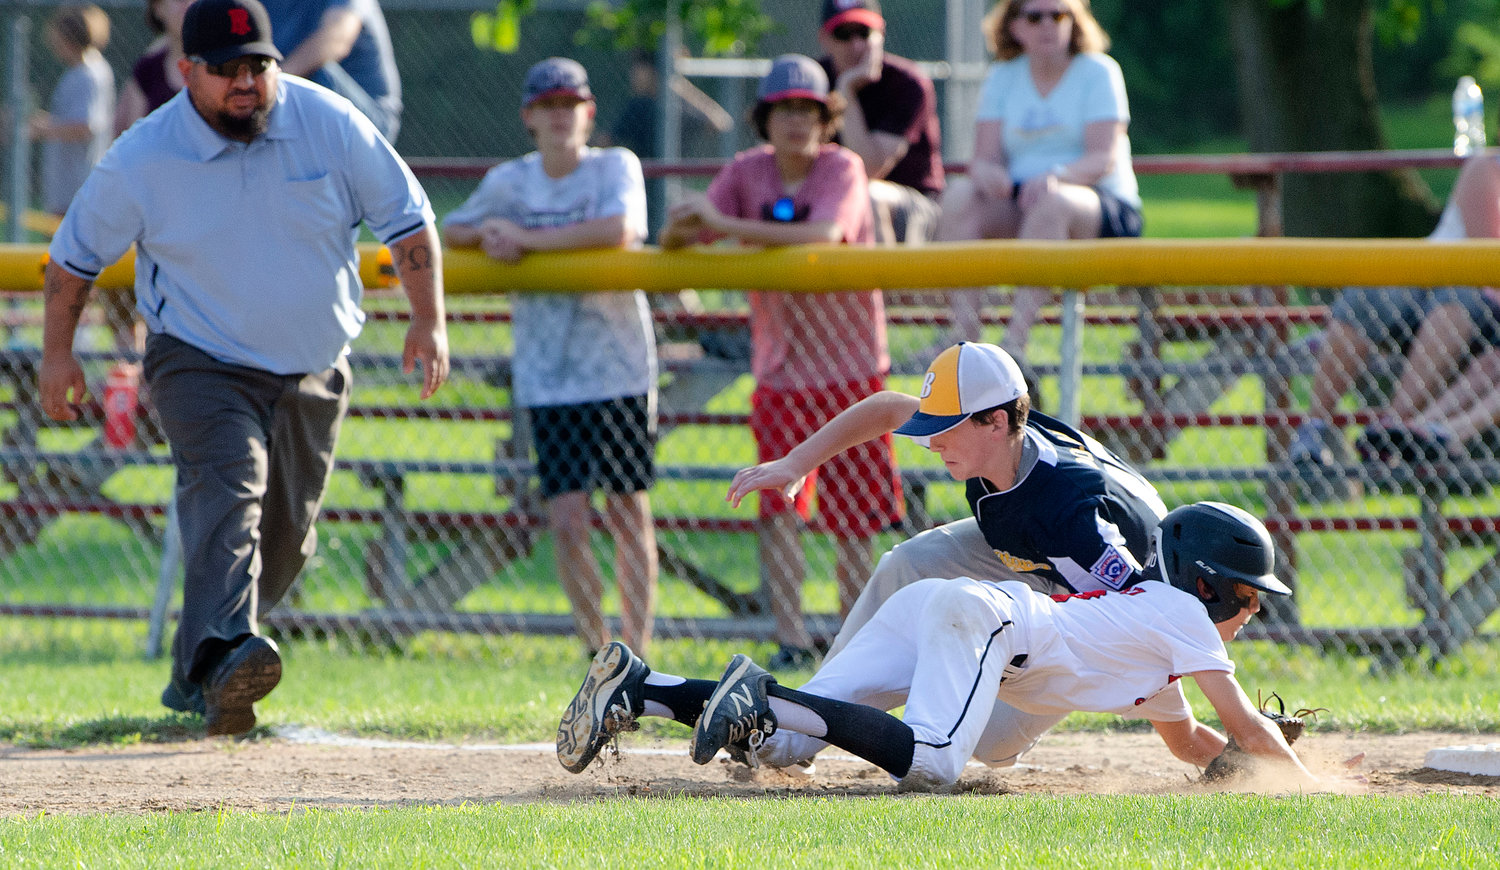 Barrington's Miles Dolan applies the tag to Riverside's JJ Renaud during the first game of the District 2 finals.